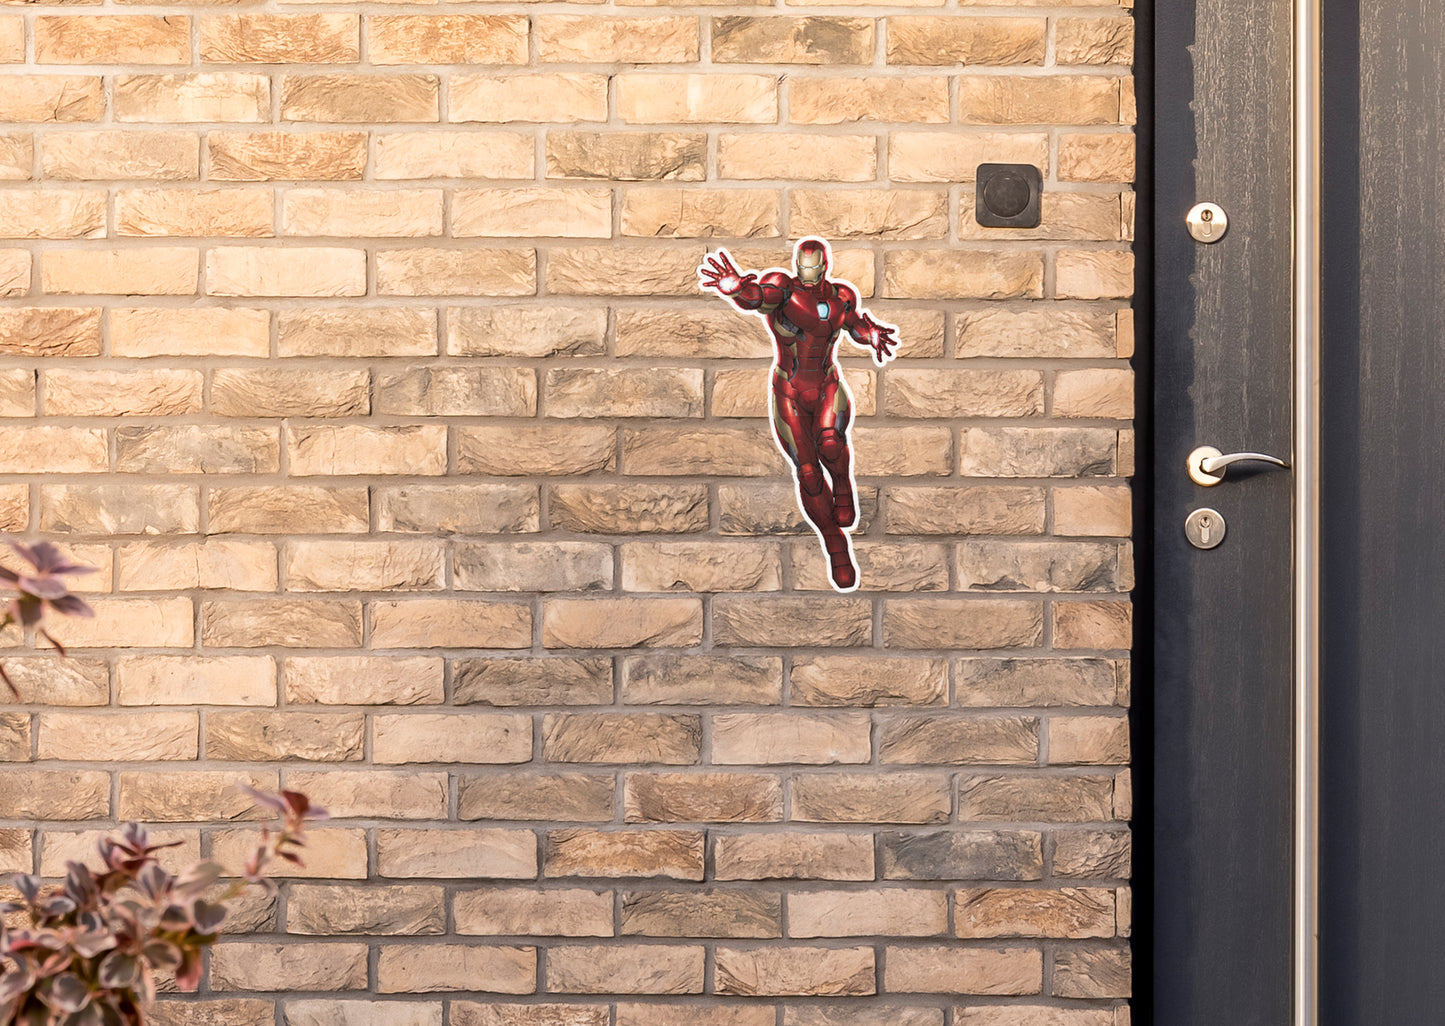 Iron Man: Iron Man Jumping        - Officially Licensed Marvel    Outdoor Graphic